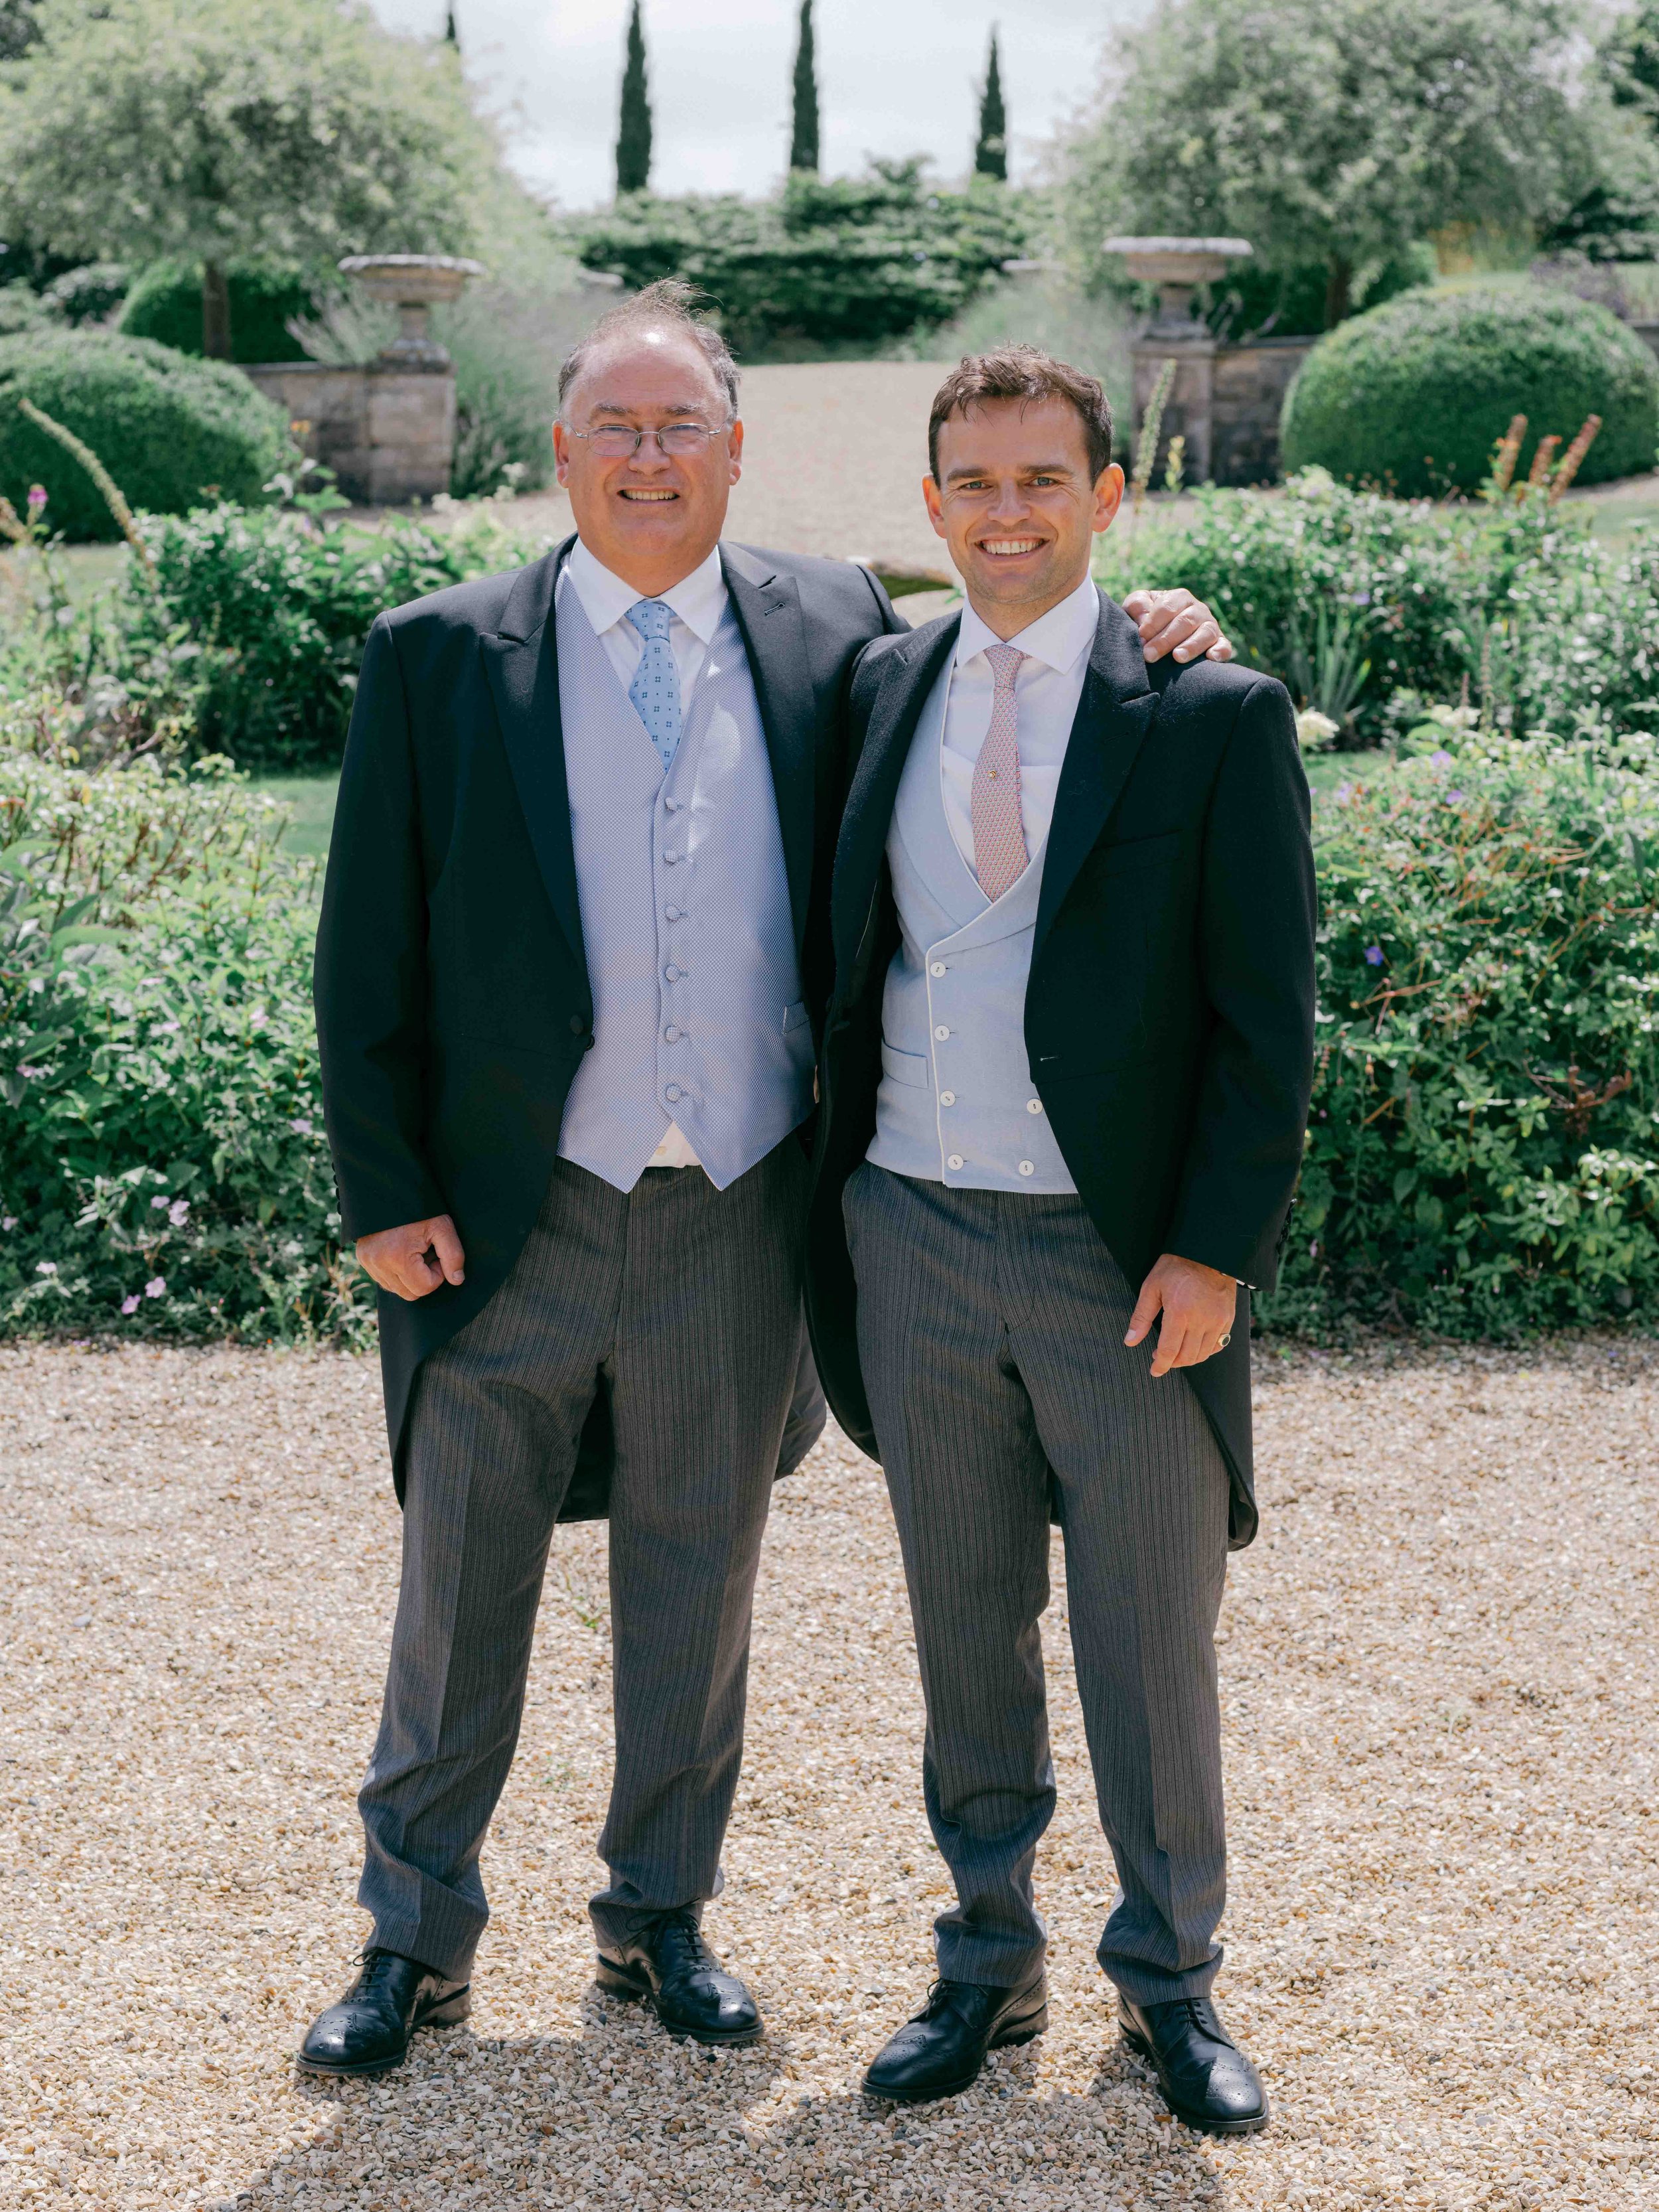  Father and Son on wedding morning  